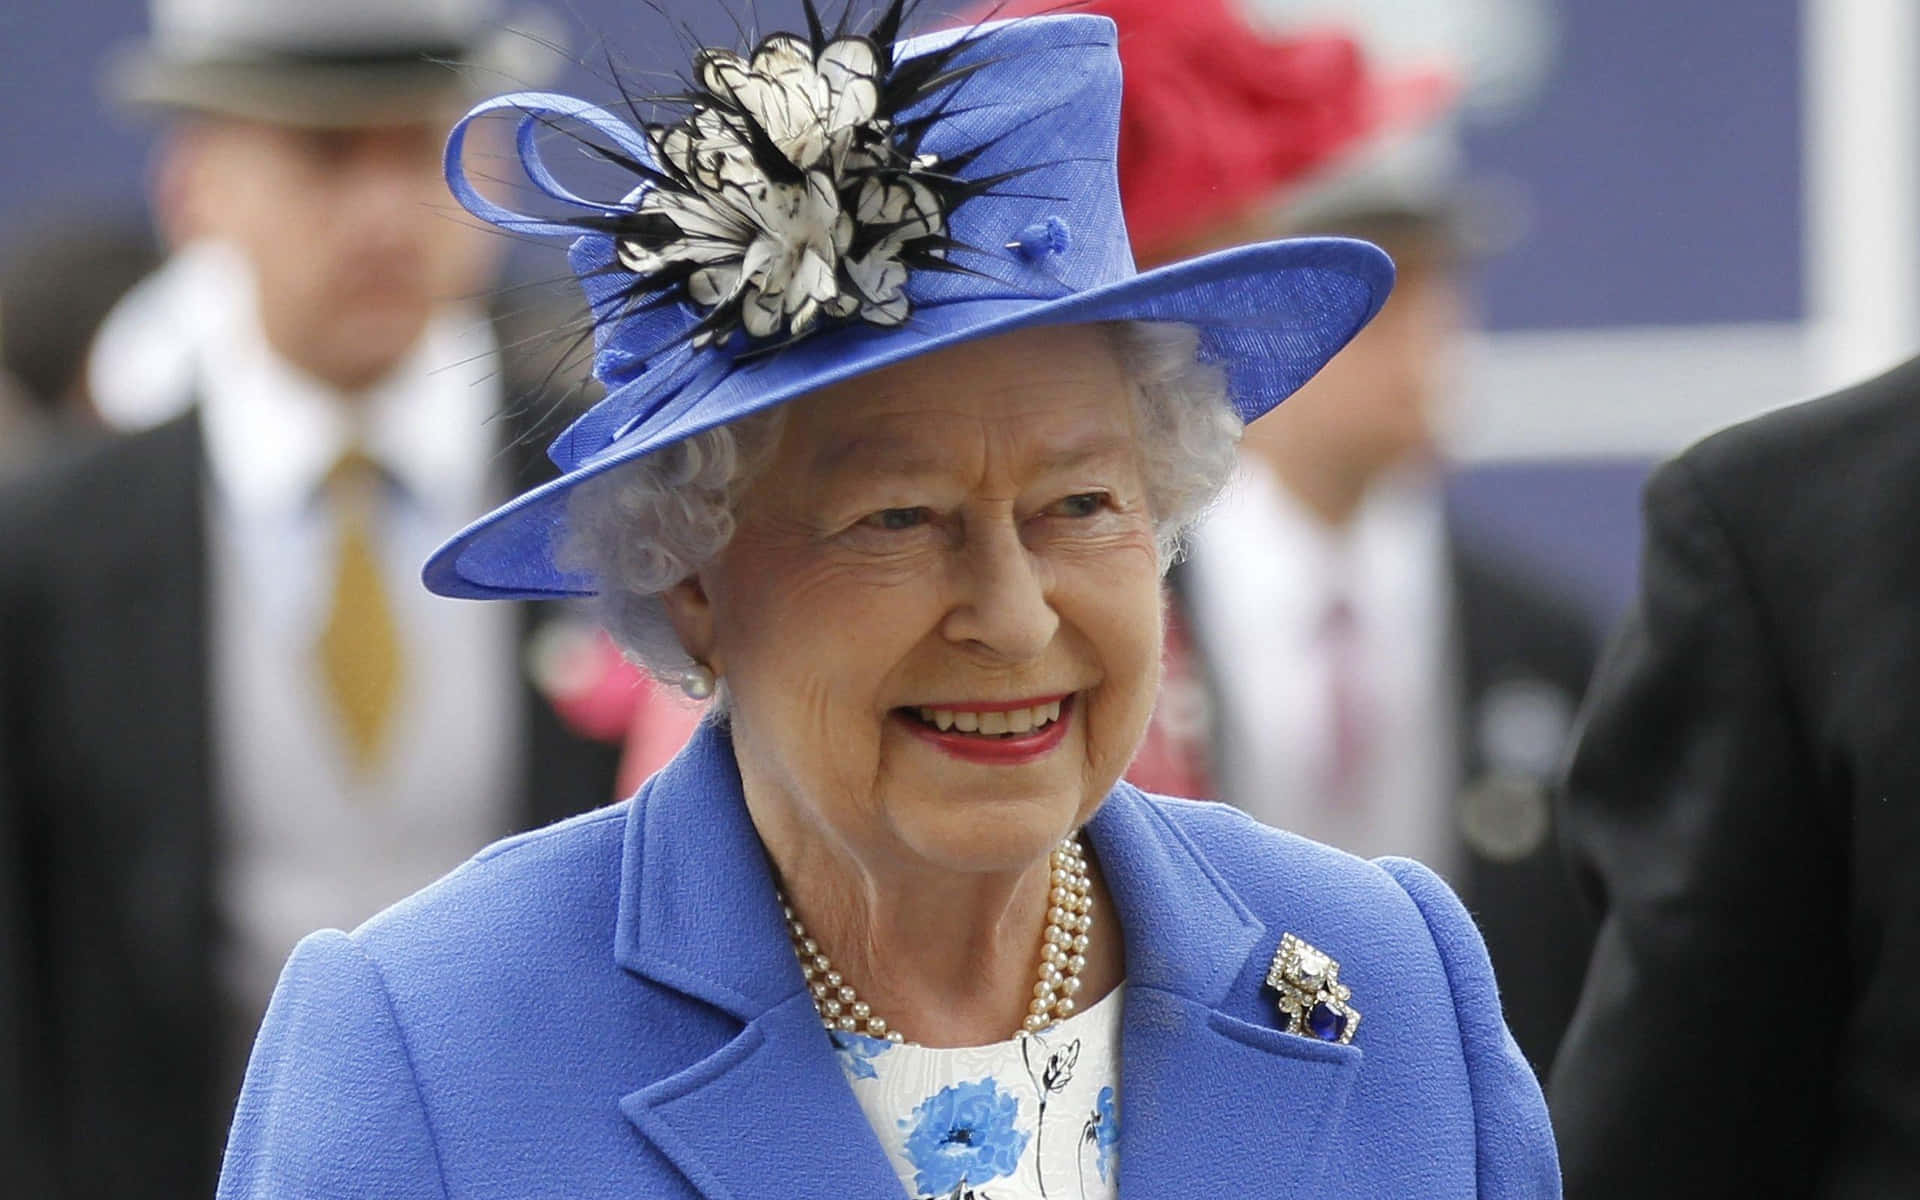 A portrait of Queen Elizabeth II with a vibrant smile on her face